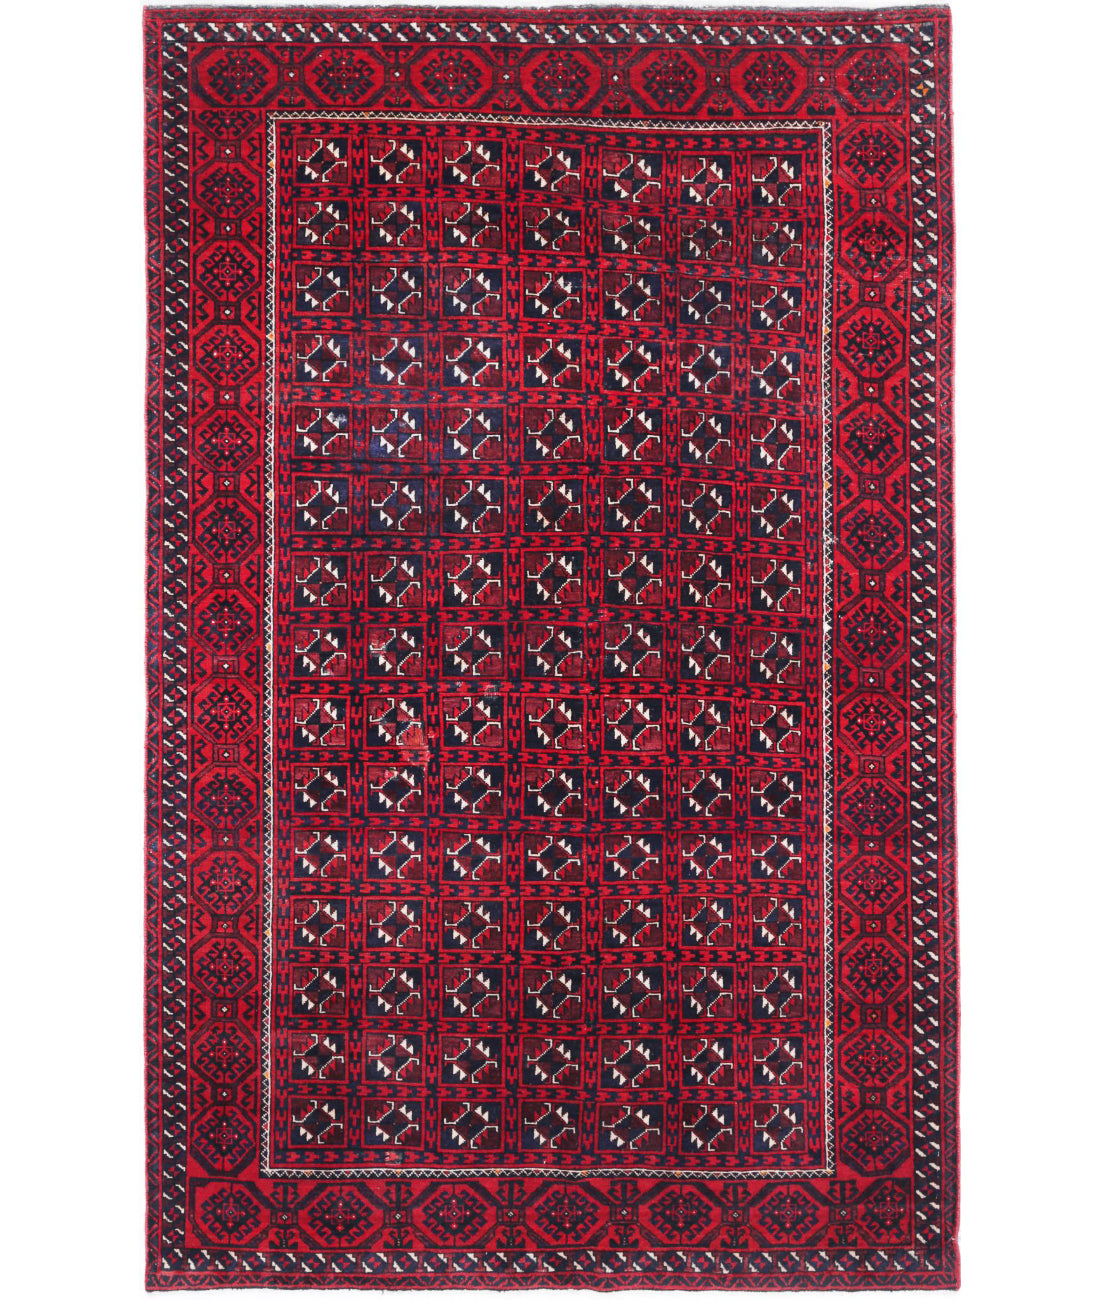 Hand Knotted Tribal Bokhara Wool Rug - 4&#39;7&#39;&#39; x 7&#39;7&#39;&#39; 4&#39;7&#39;&#39; x 7&#39;7&#39;&#39; (138 X 228) / Red / Blue